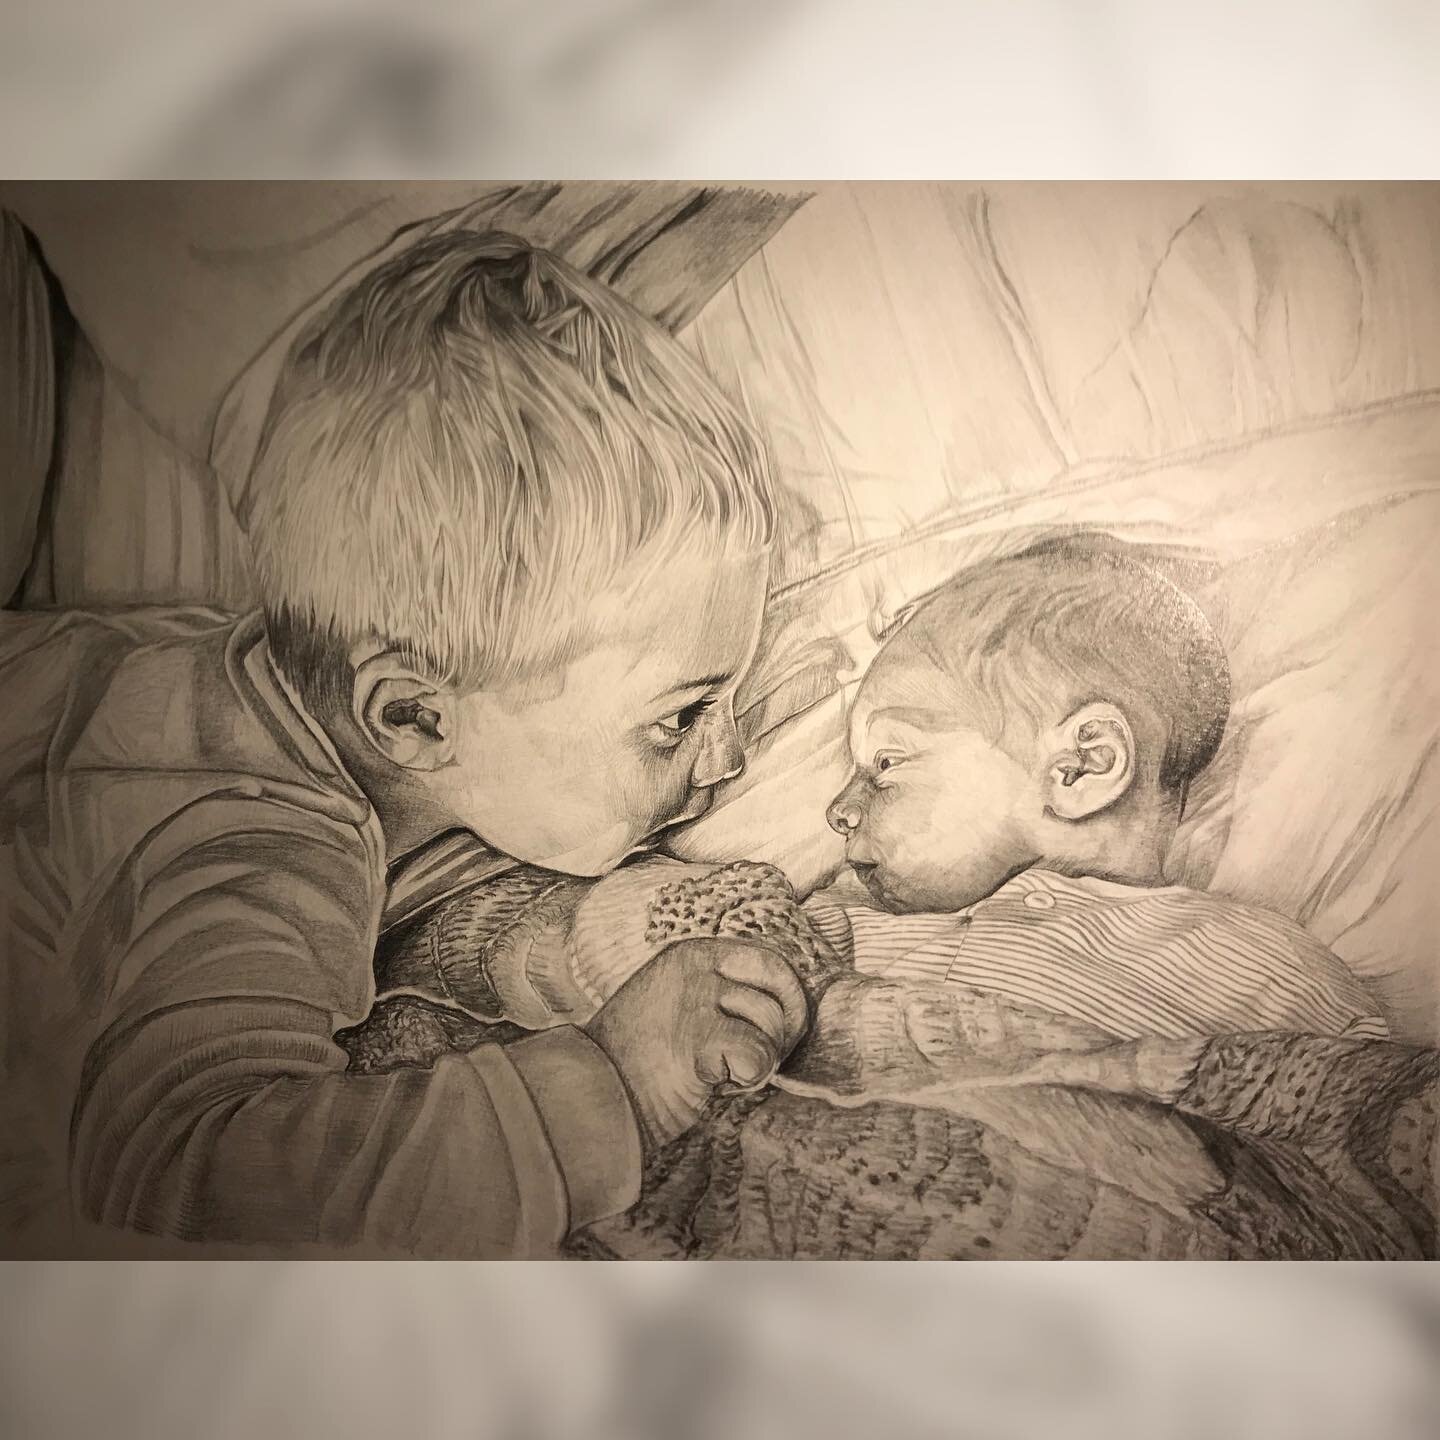 My first commission that isn&rsquo;t an animal! 😅 Two brothers meeting for the first time 🖼 💙 
&bull;
&bull;
&bull;

#brothers #realismdrawing #bespoke #drawings #commissionsopen #portraitdrawing #portraitsofinstagram #artistsoninstagram #discover